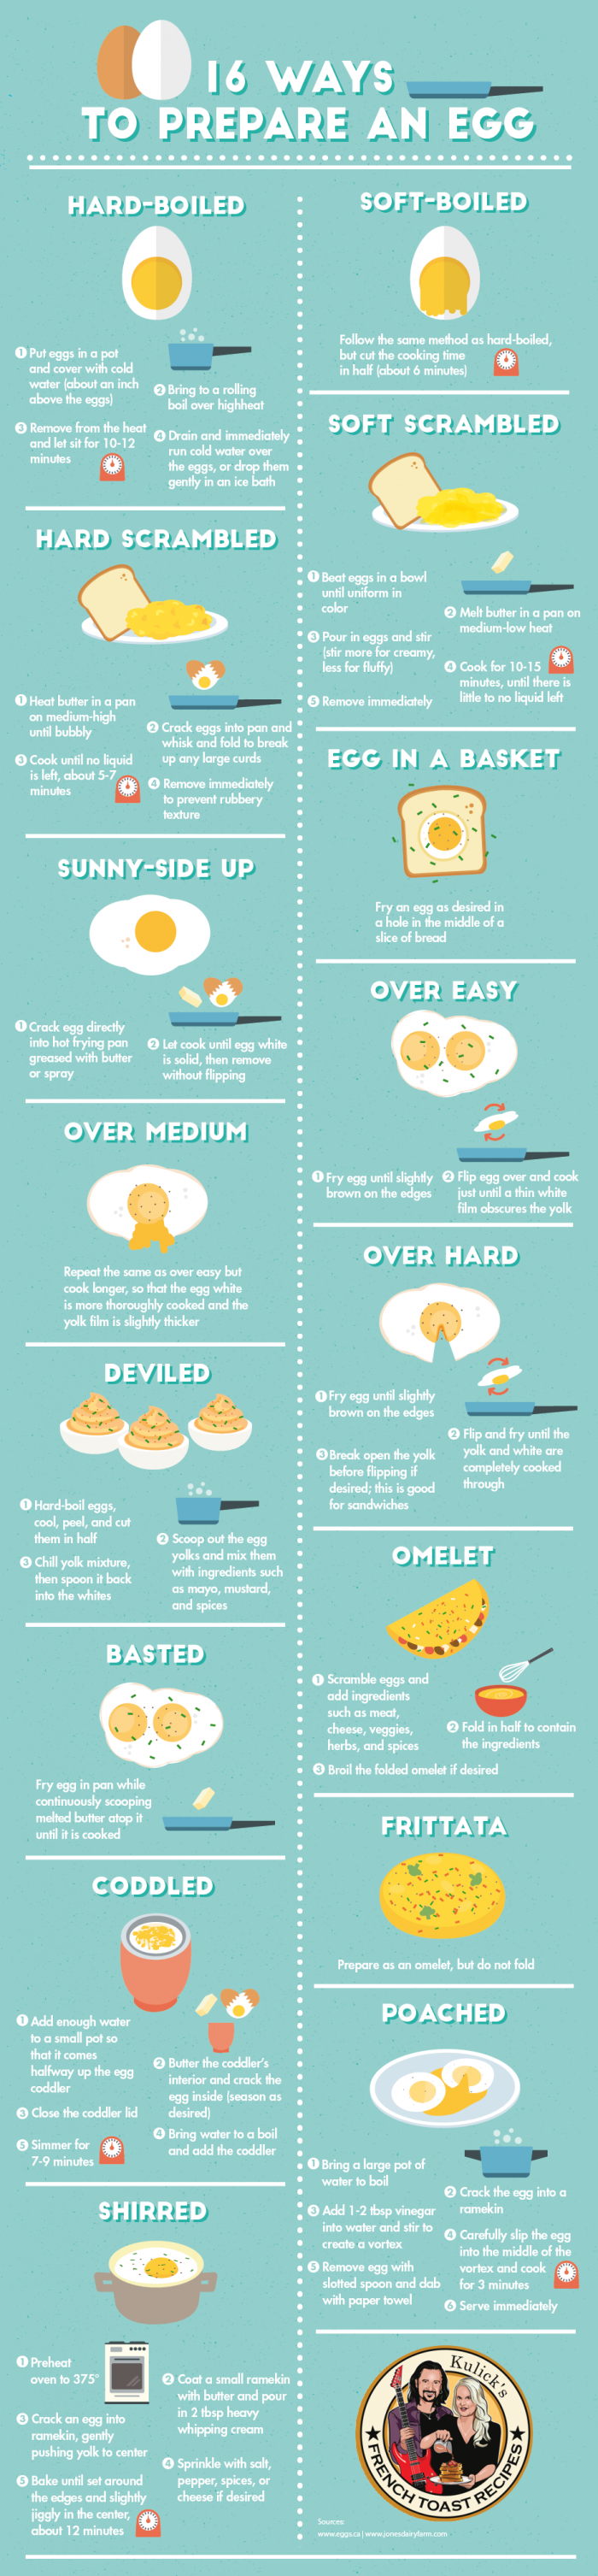 different ways to prepare an egg